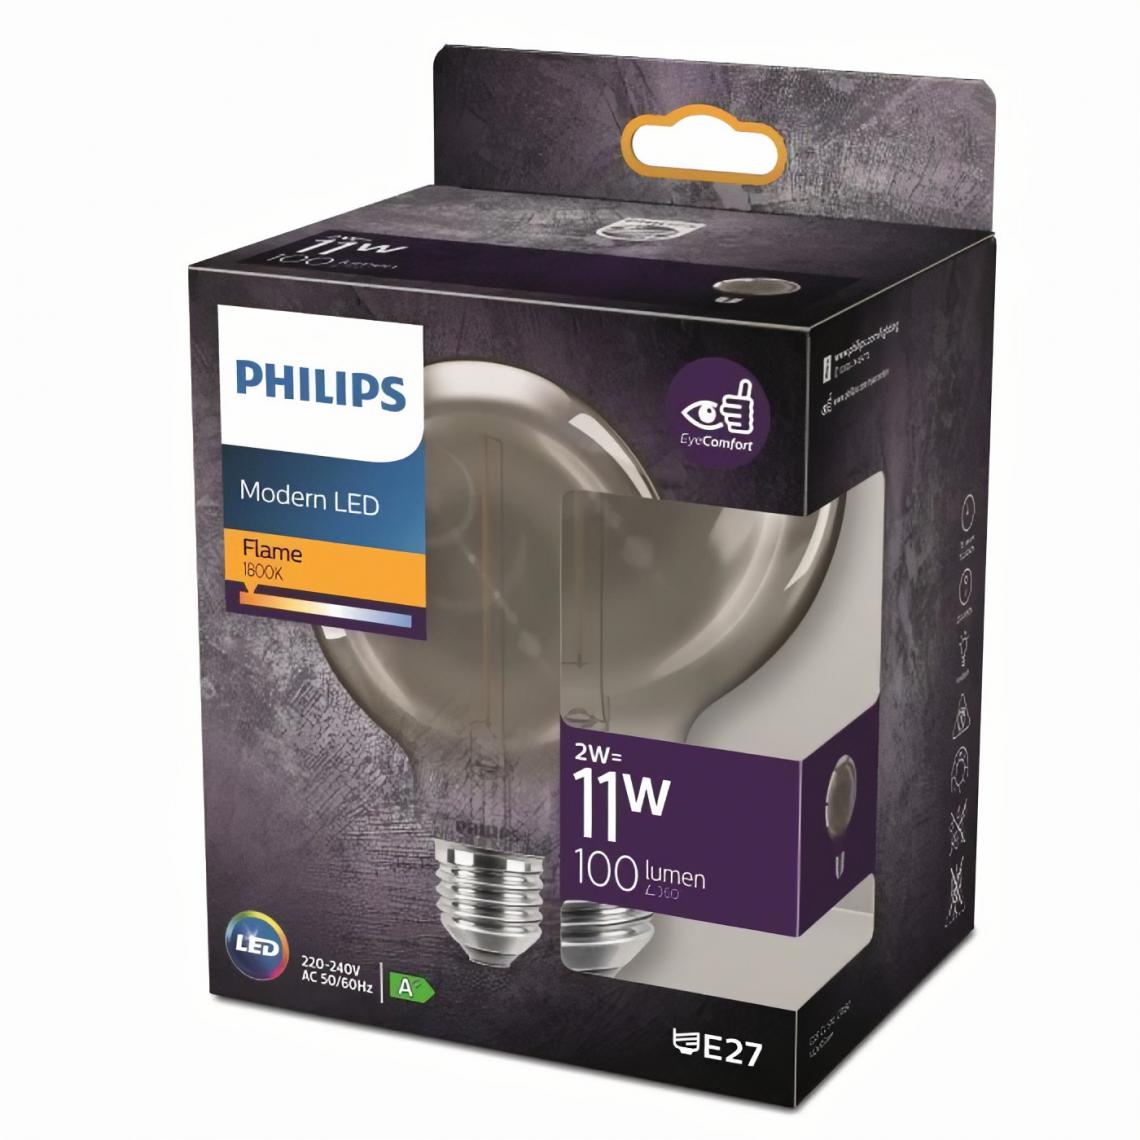 Philips - Philips ampoule LED Equivalent 11W E27 smoky Blanc chaud non dimmable, Verre - Ampoules LED